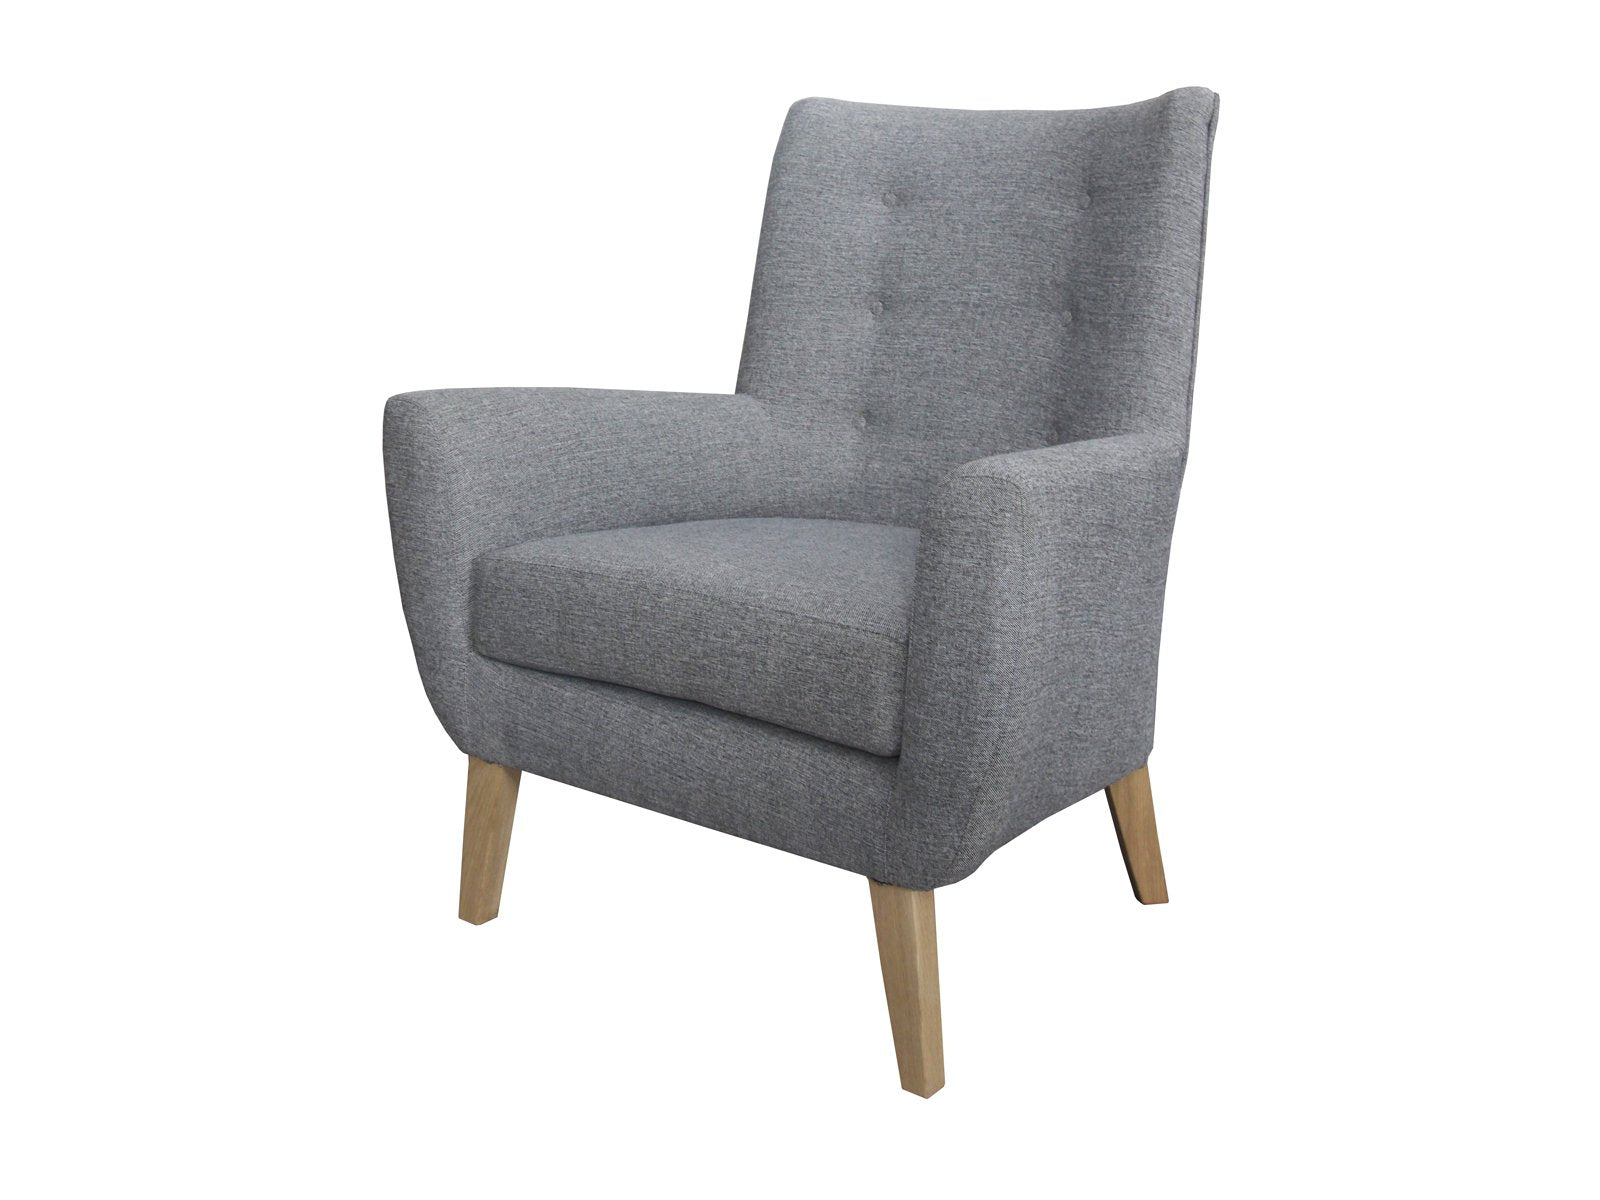 Napier Occasional Fabric Chair With Buttons